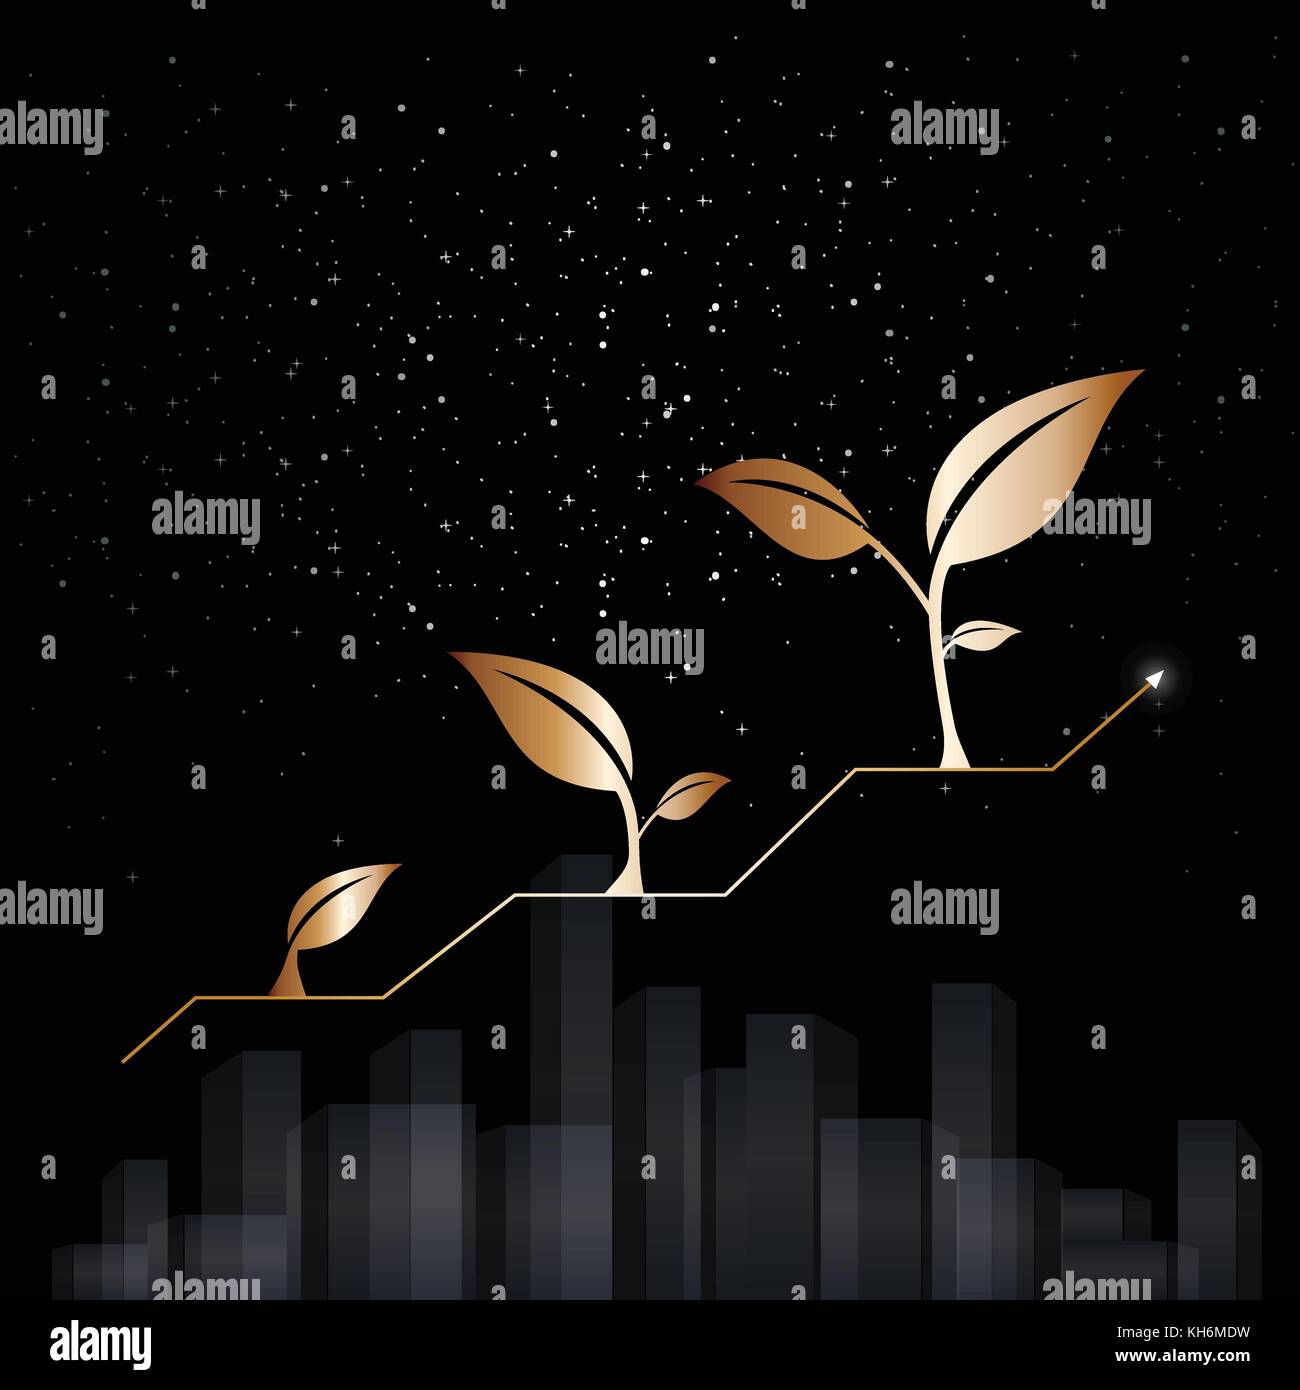 Growth of business or economy. Growing plant. Elegant gold and black background. Stock Vector